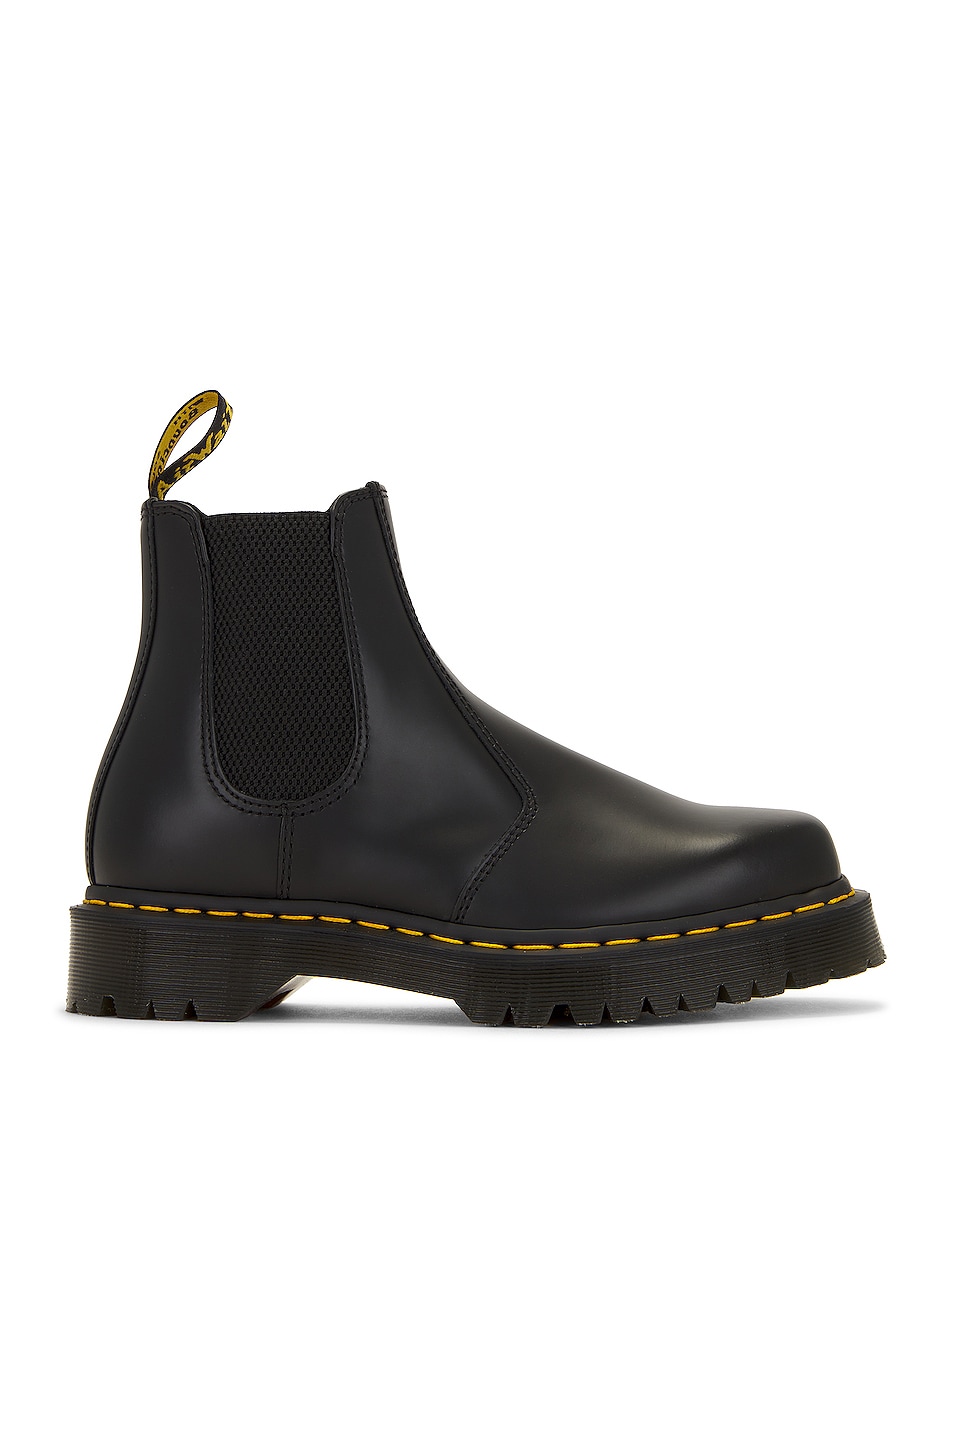 Image 1 of Dr. Martens 2976 Bex Squared Polished Smooth Boot in Black